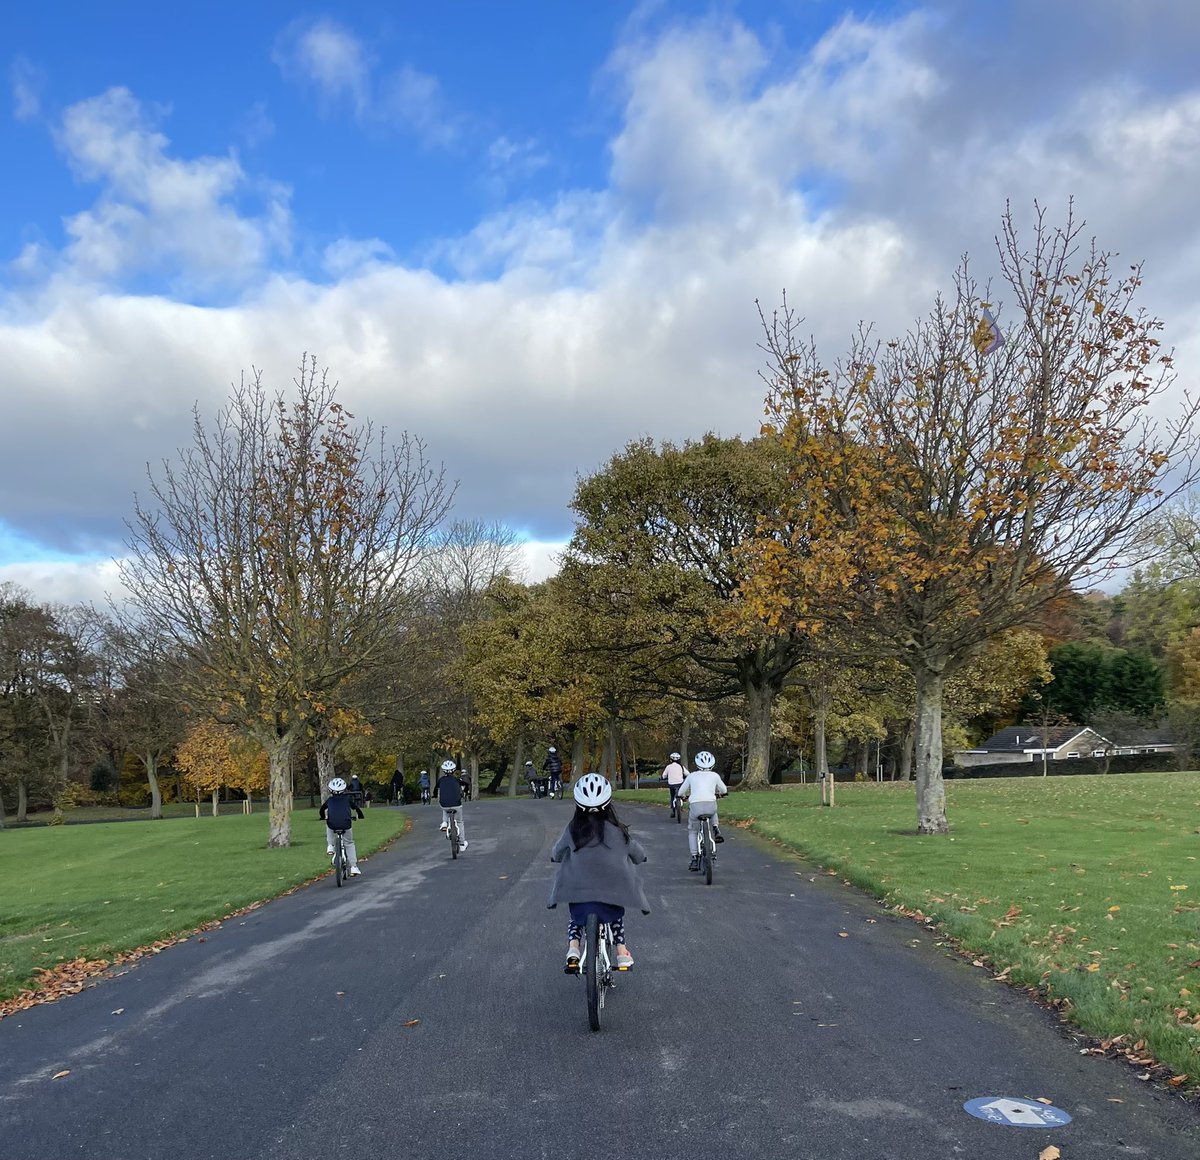 FREE Cycling activities tomorrow, Tuesday 22nd February for Children aged 7 to 10 at Peel Park. 1pm-2.30pm Book here: hopon.bike/book-session/